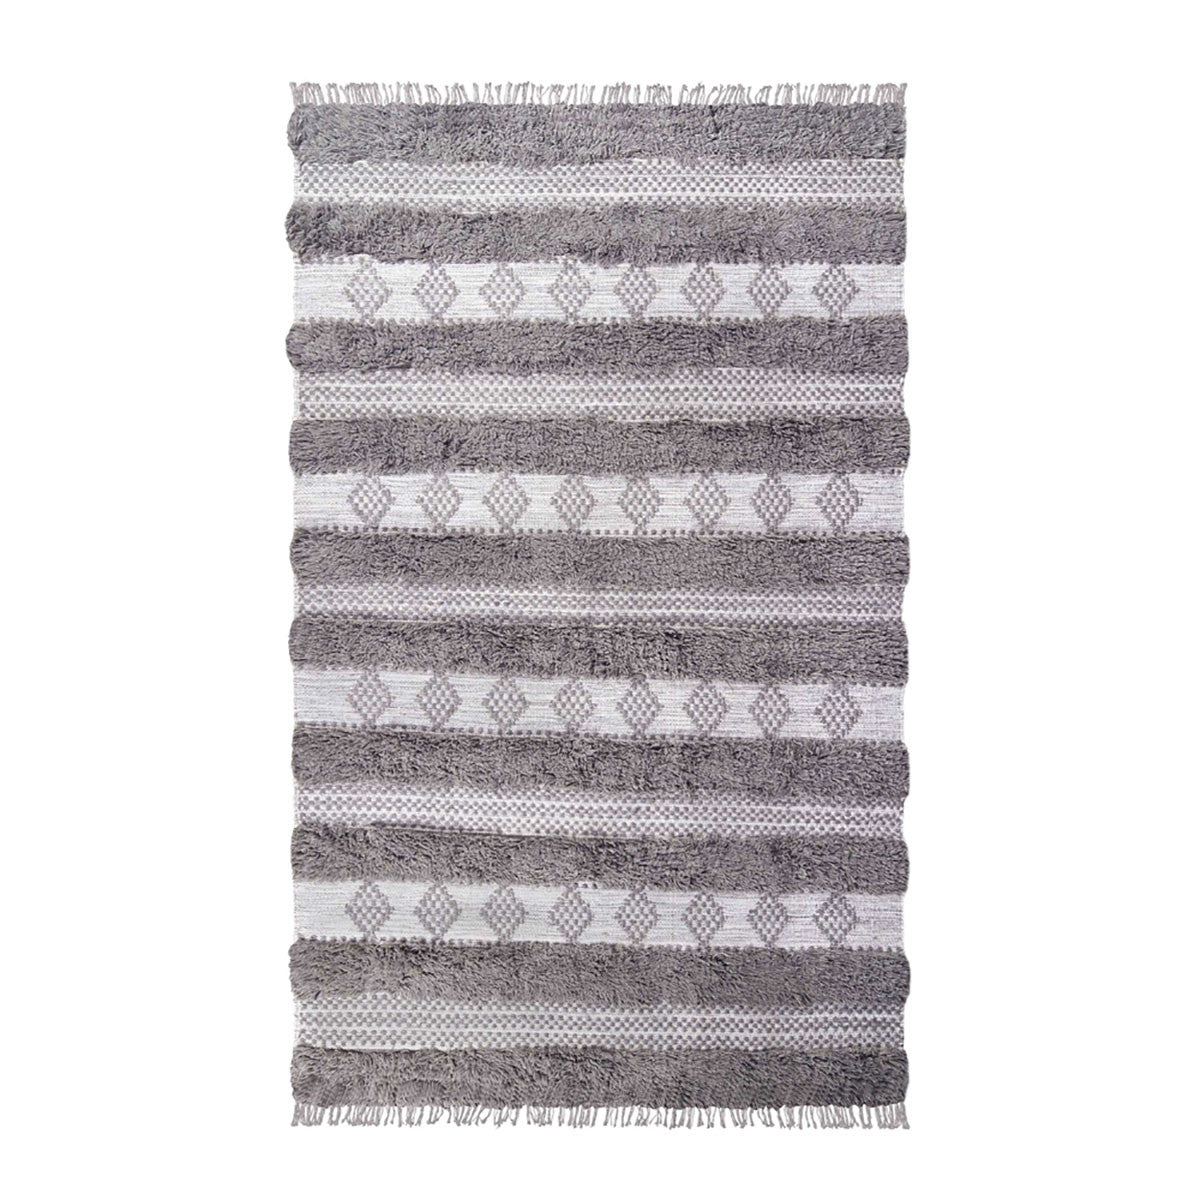 4' X 6' Grey And Silver Wool Striped Flatweave Handmade Stain Resistant Area Rug With Fringe